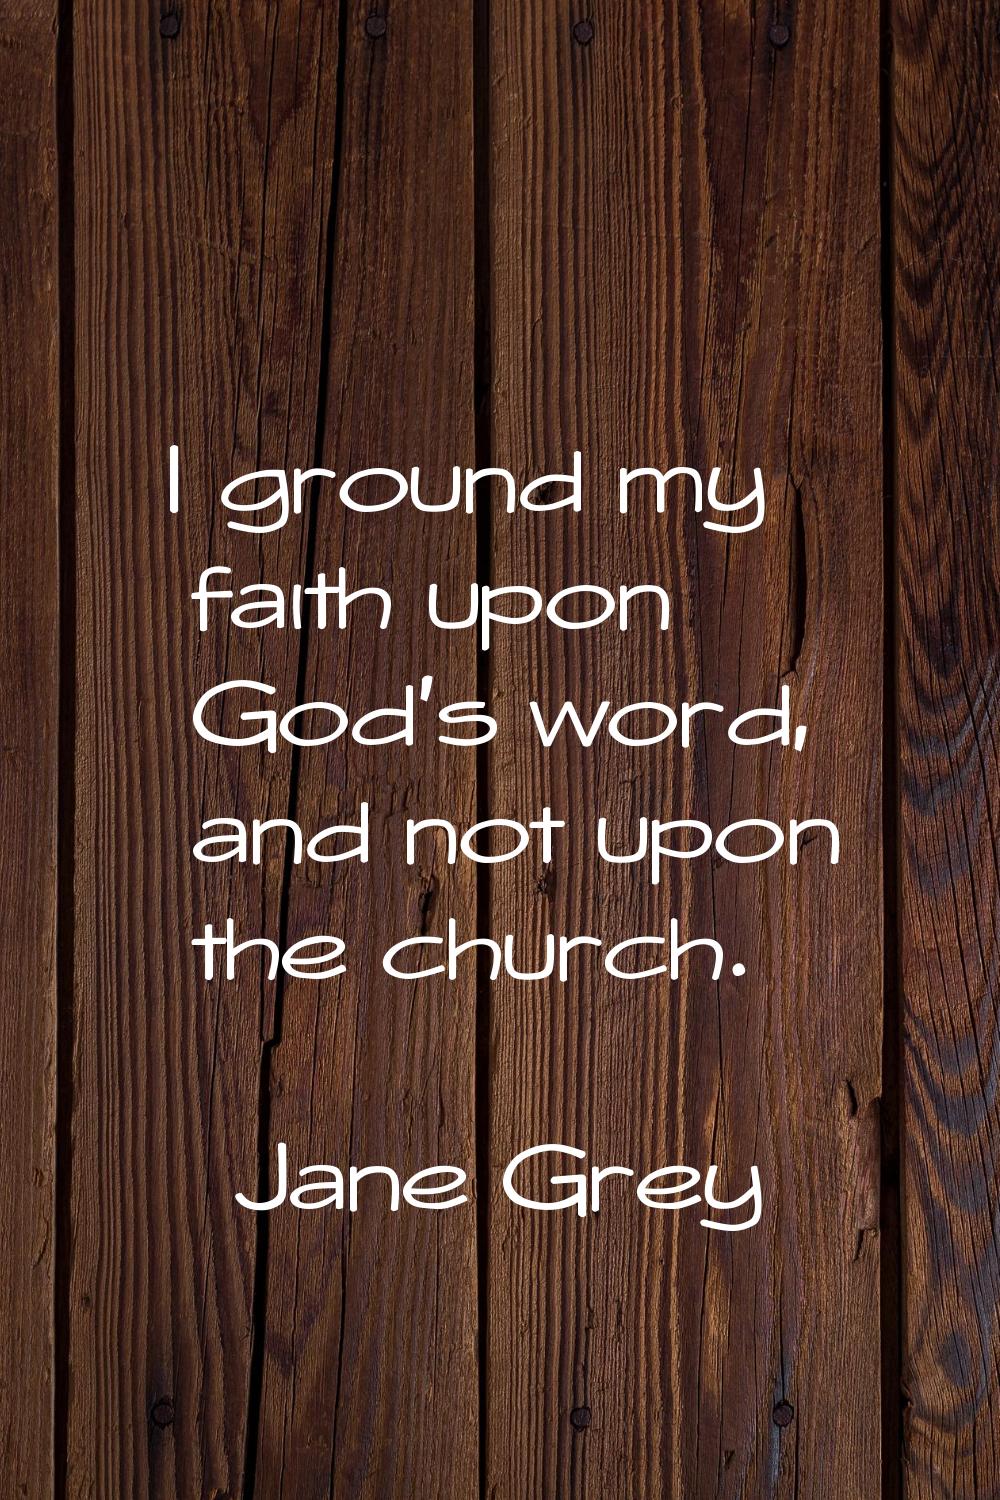 I ground my faith upon God's word, and not upon the church.